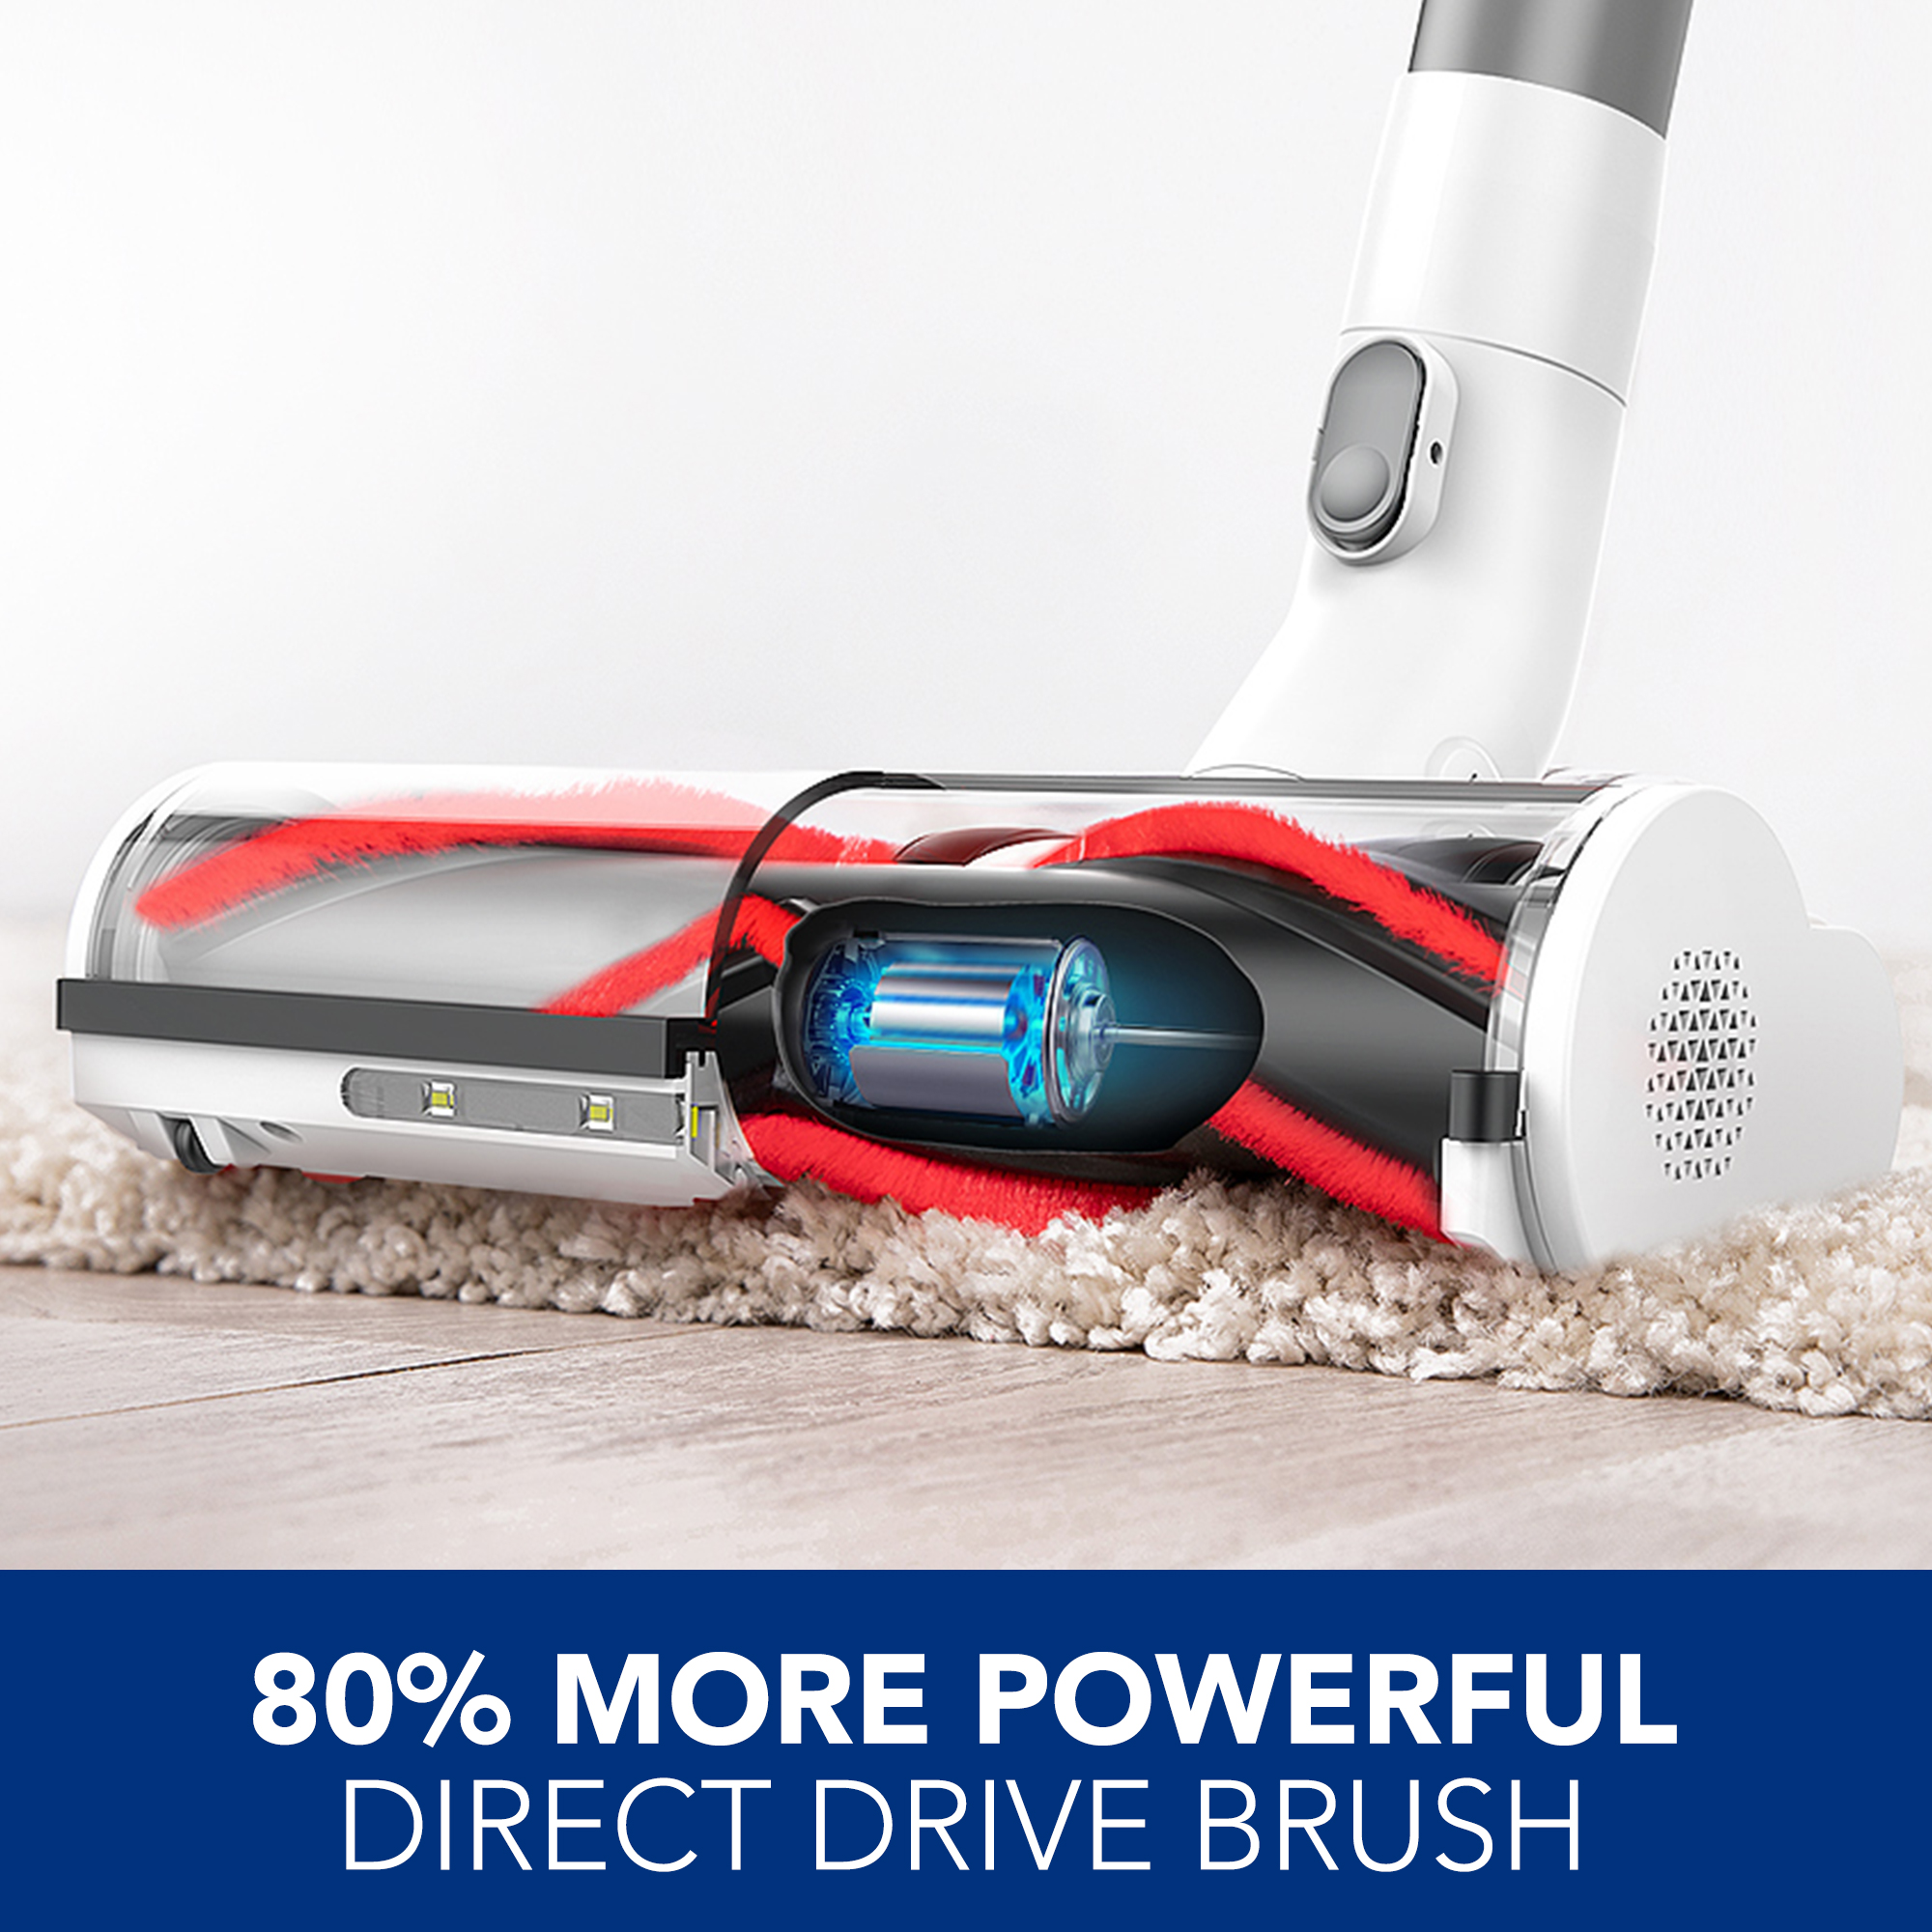 Tineco Pure One S12 EX Smart Cordless Stick Vacuum Cleaner with Two Batteries up to 100 minutes runtime - image 5 of 7